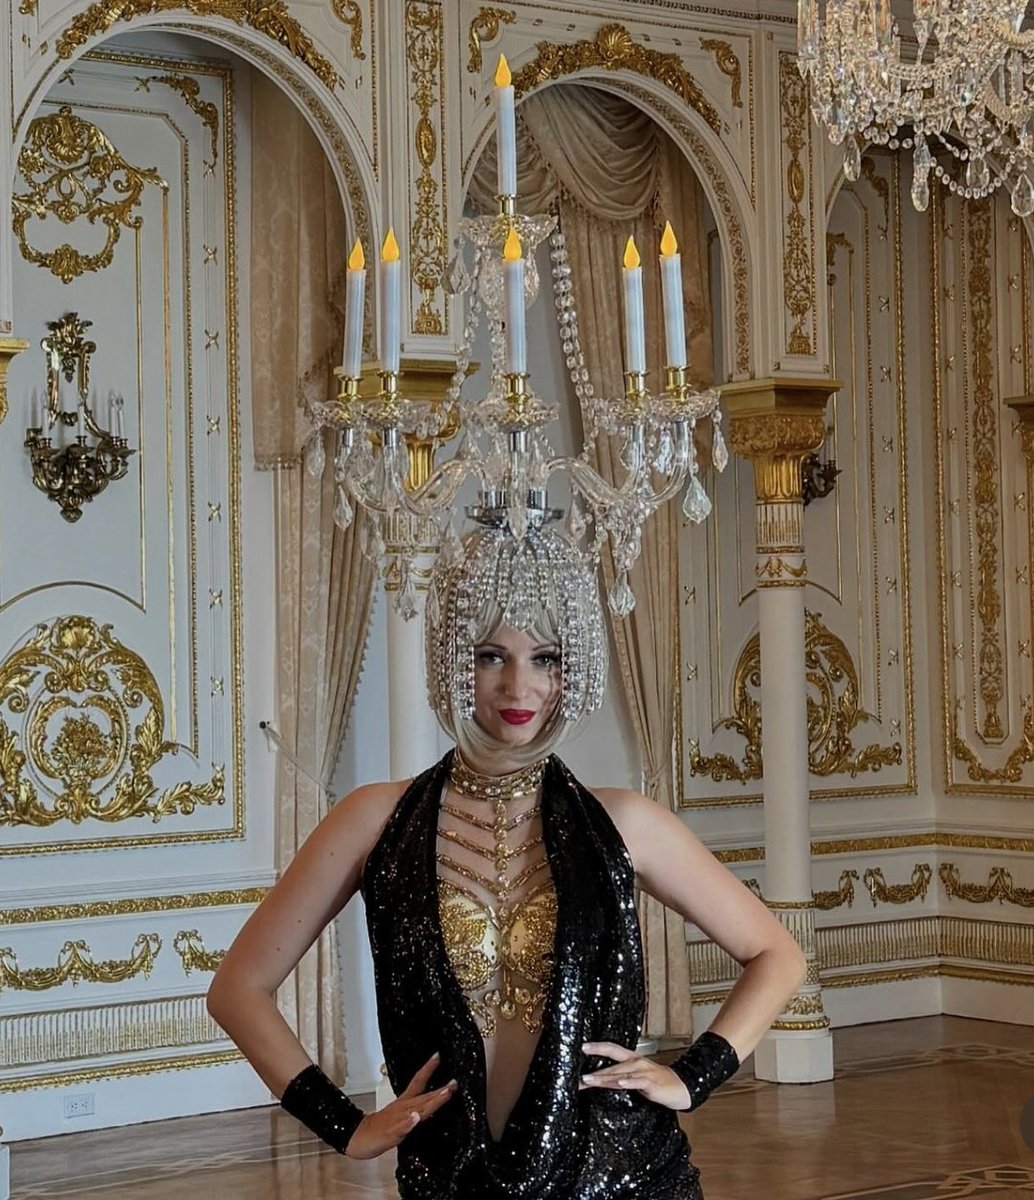 Trump is just like us! Who doesn’t have an entertainer wearing a chandelier on their head in their home?